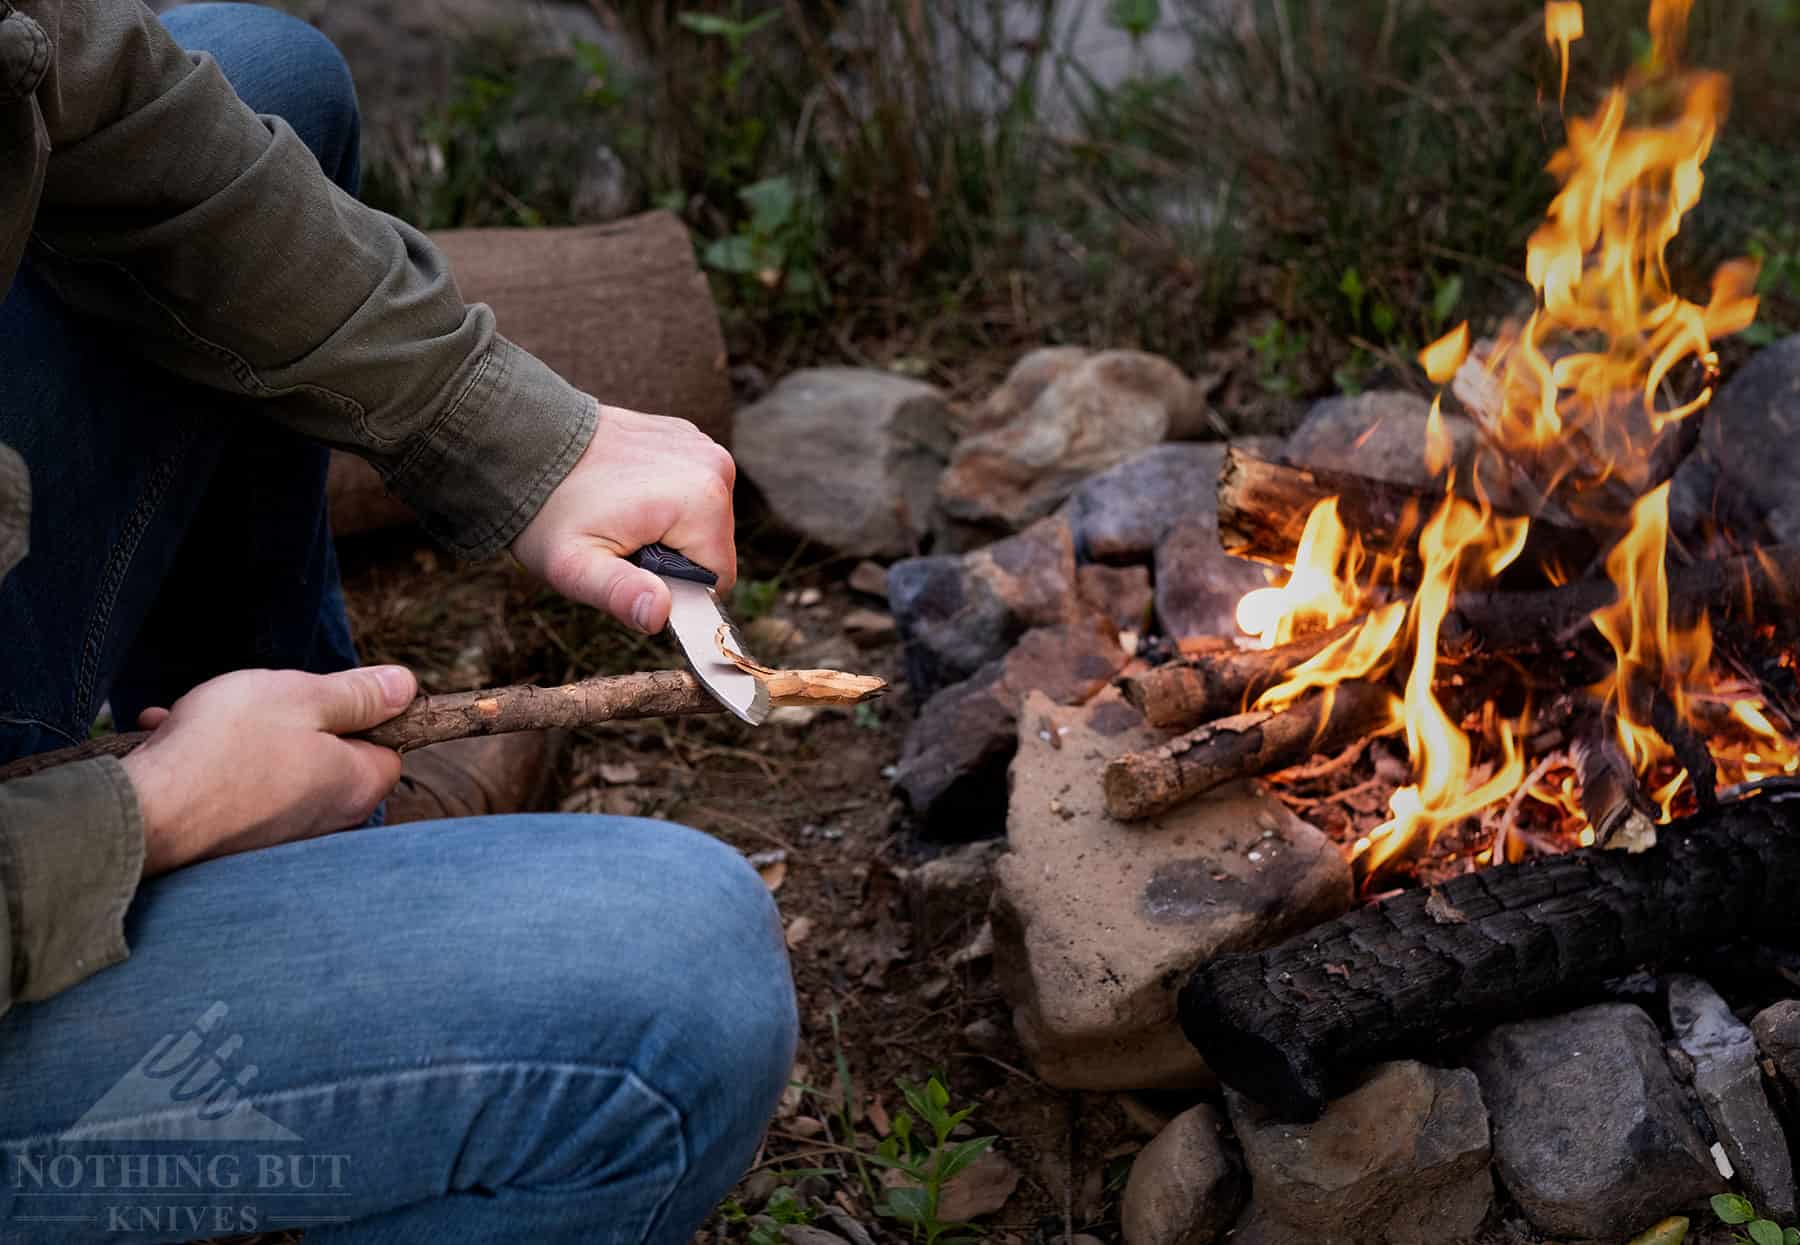 A close up of a person carving a stick next to a campfire to show how effective the scandi grind on the Ridgeback is.